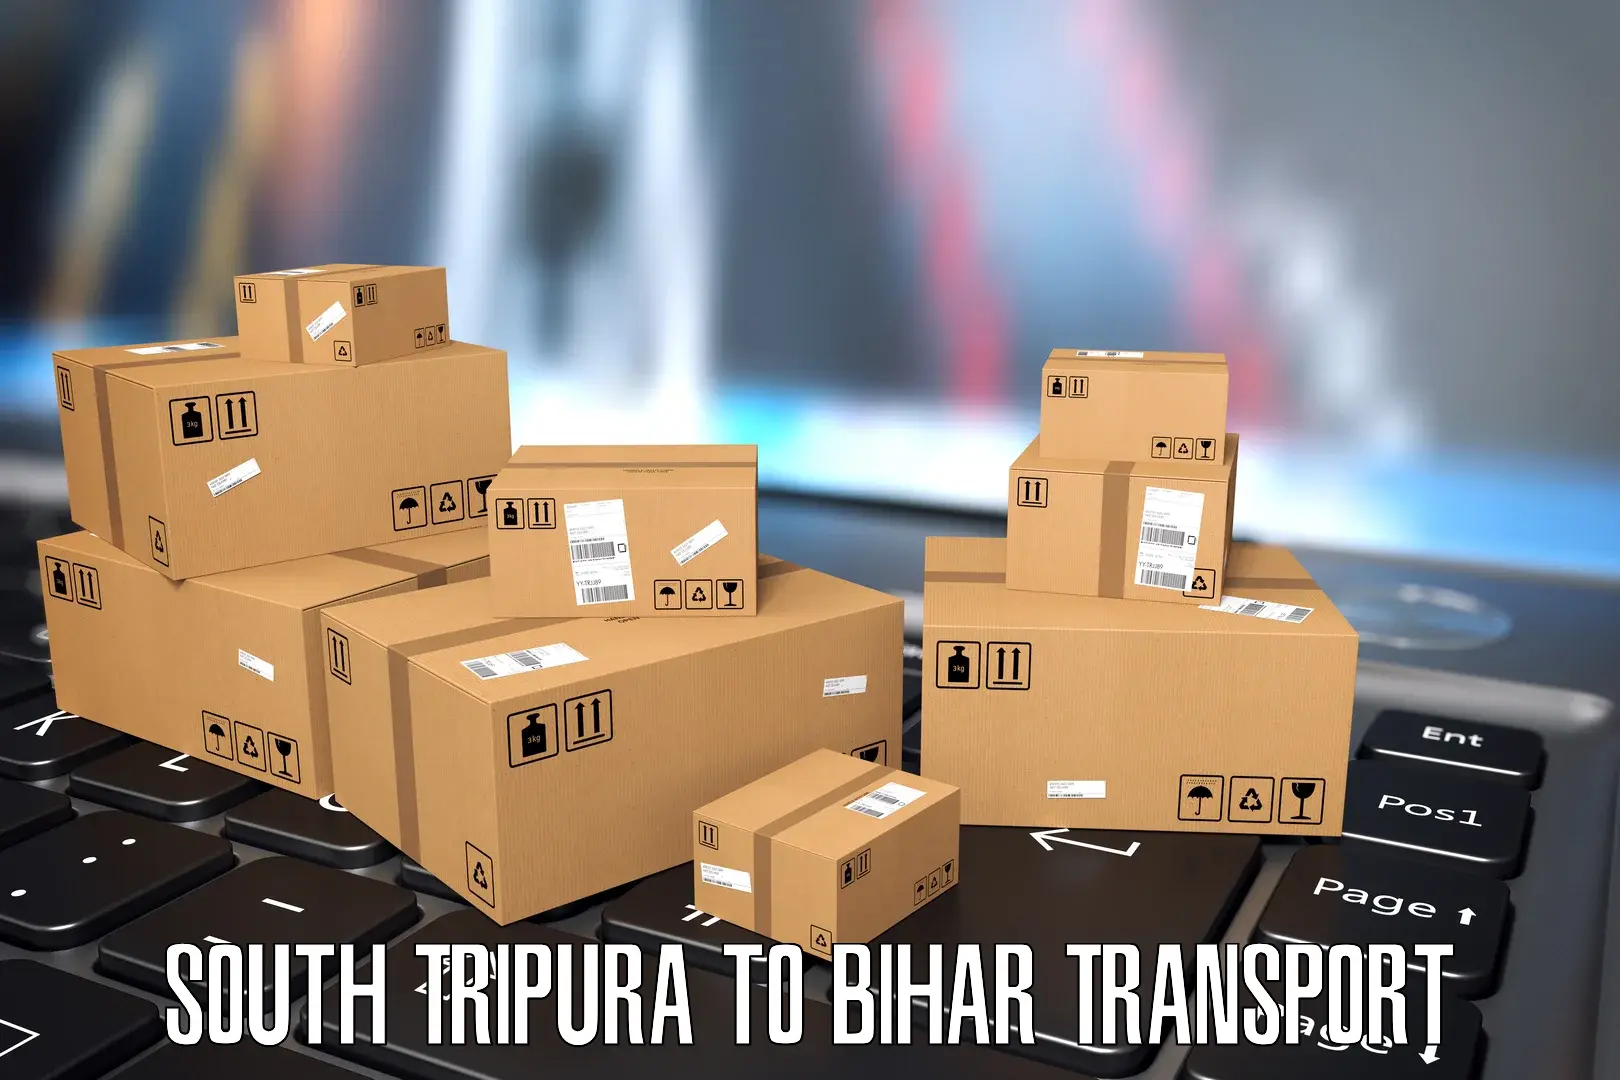 Delivery service South Tripura to Bihar